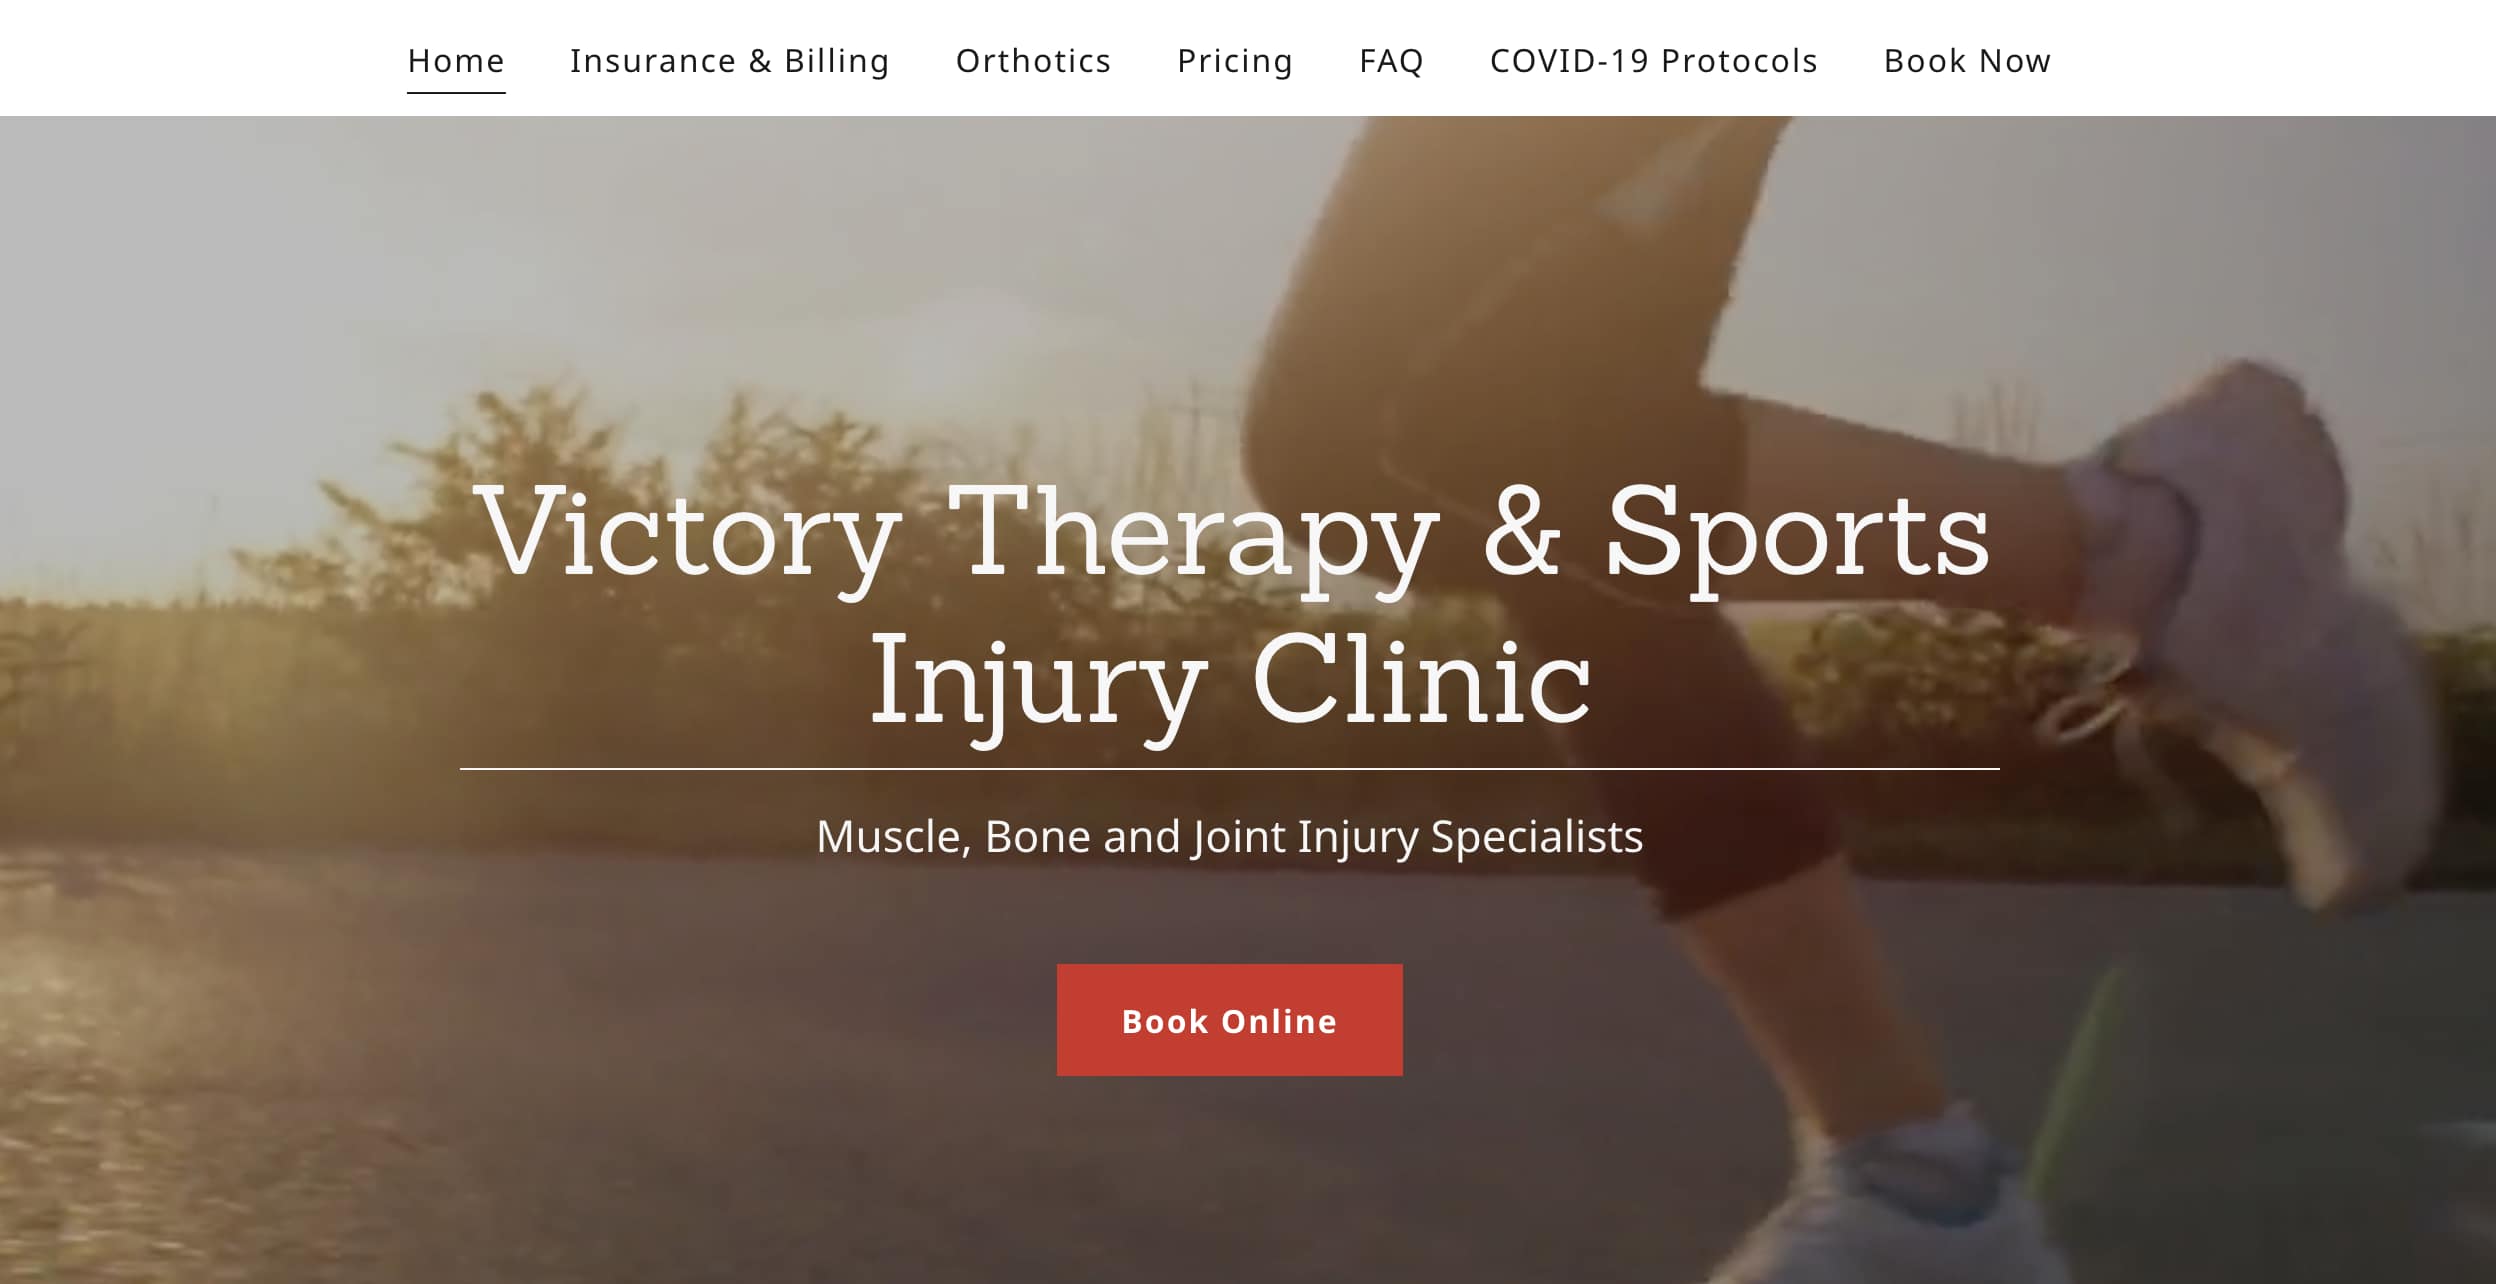 Victory Therapy & Sports Injury Clinic